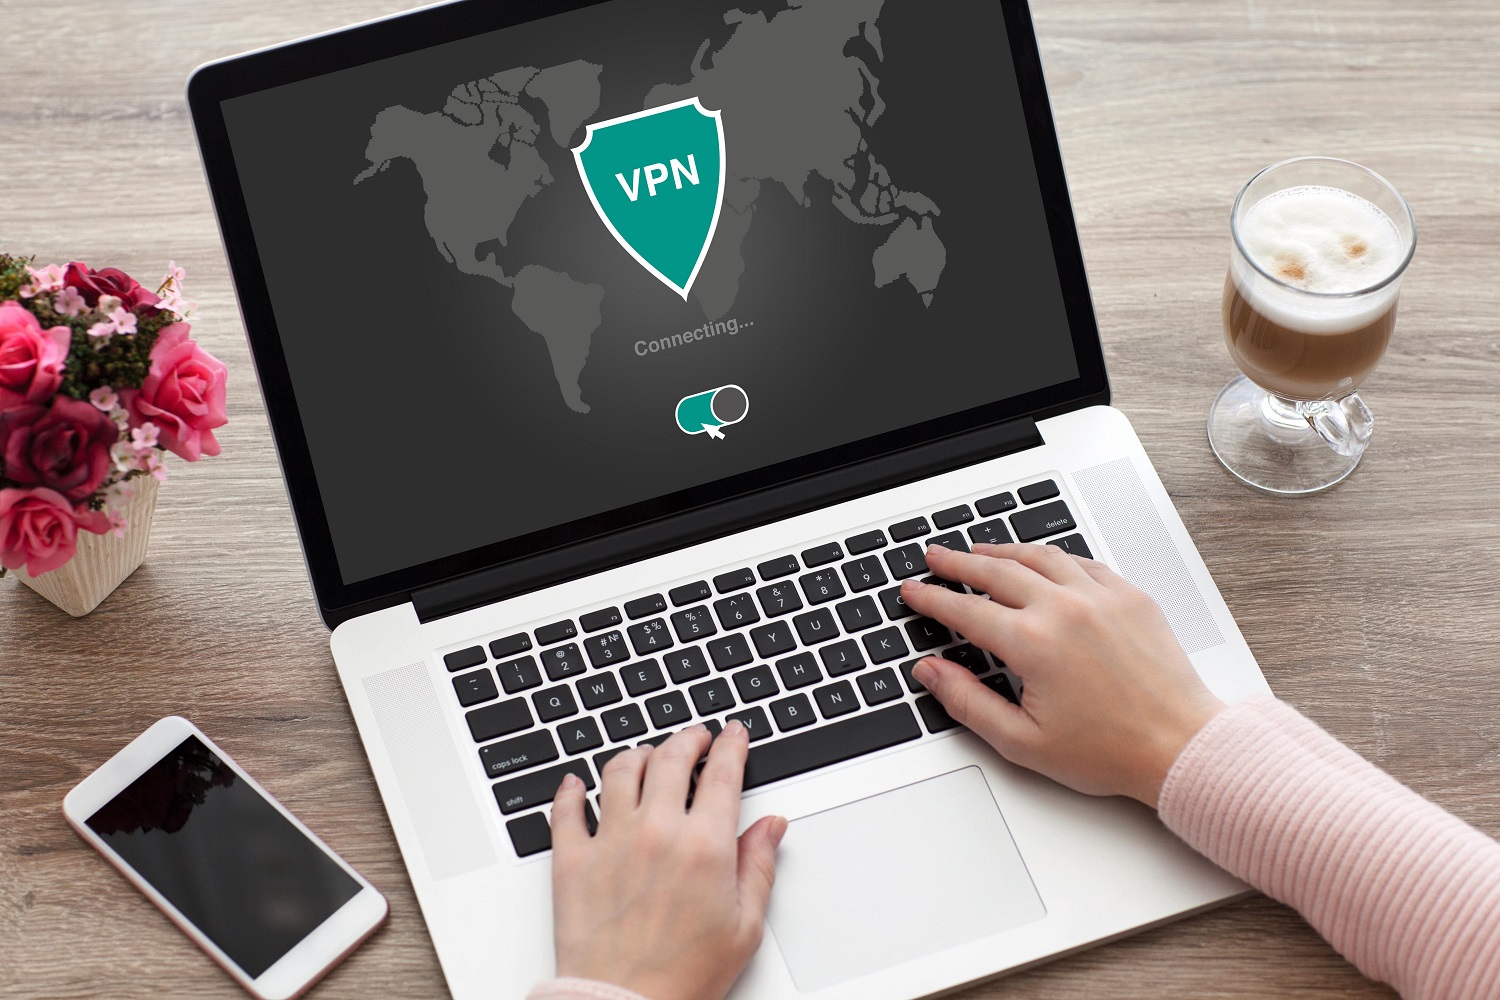 What is a VPN and how important is it